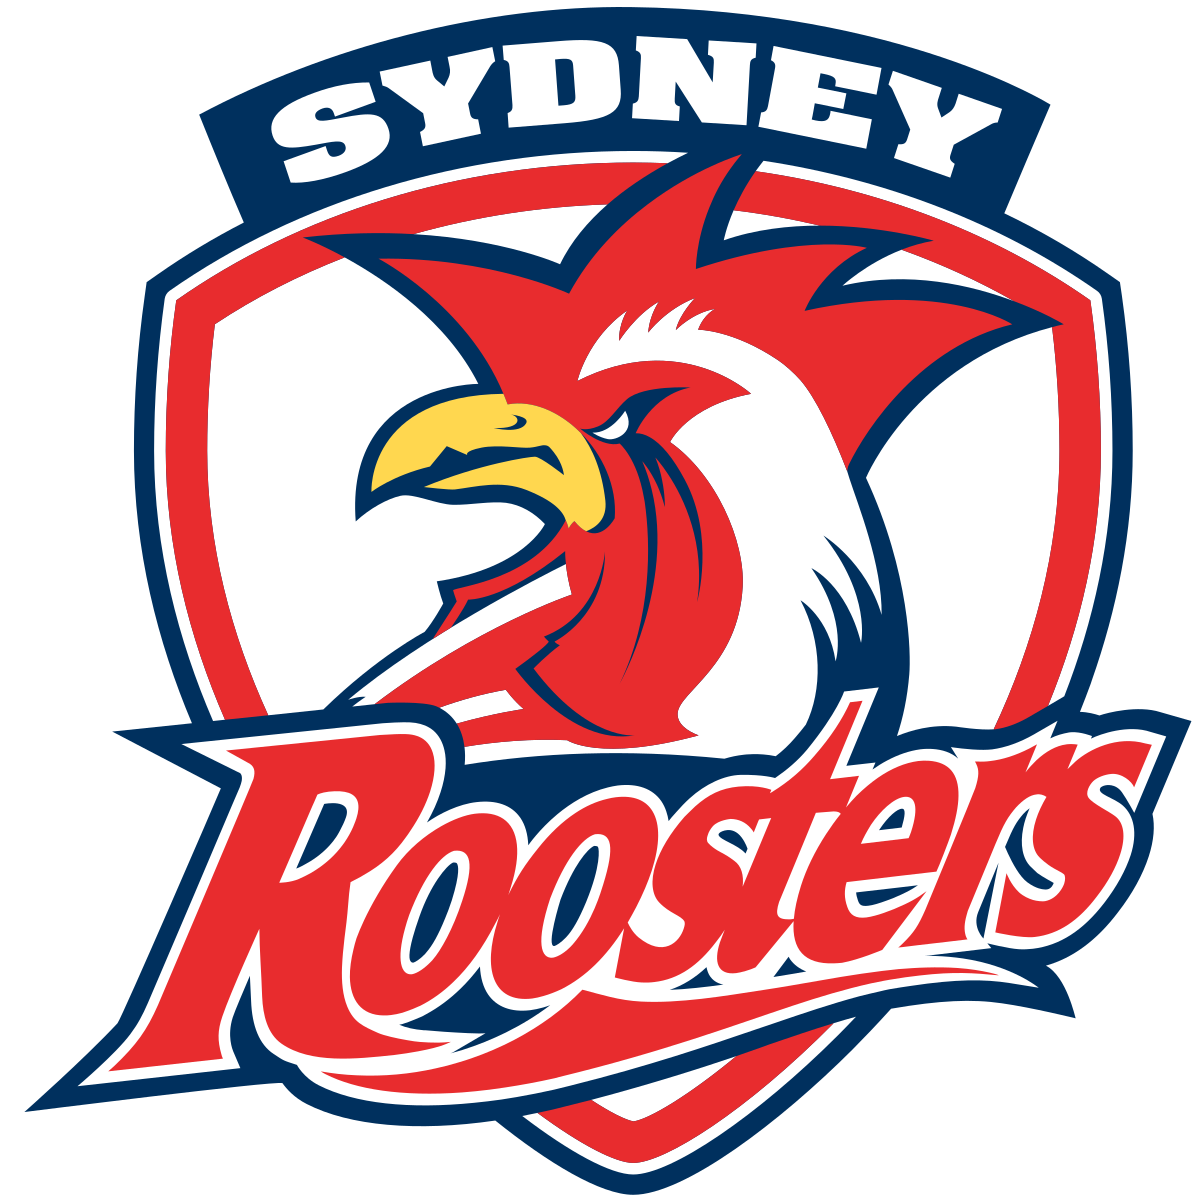 Sydney Roosters - Wikipedia